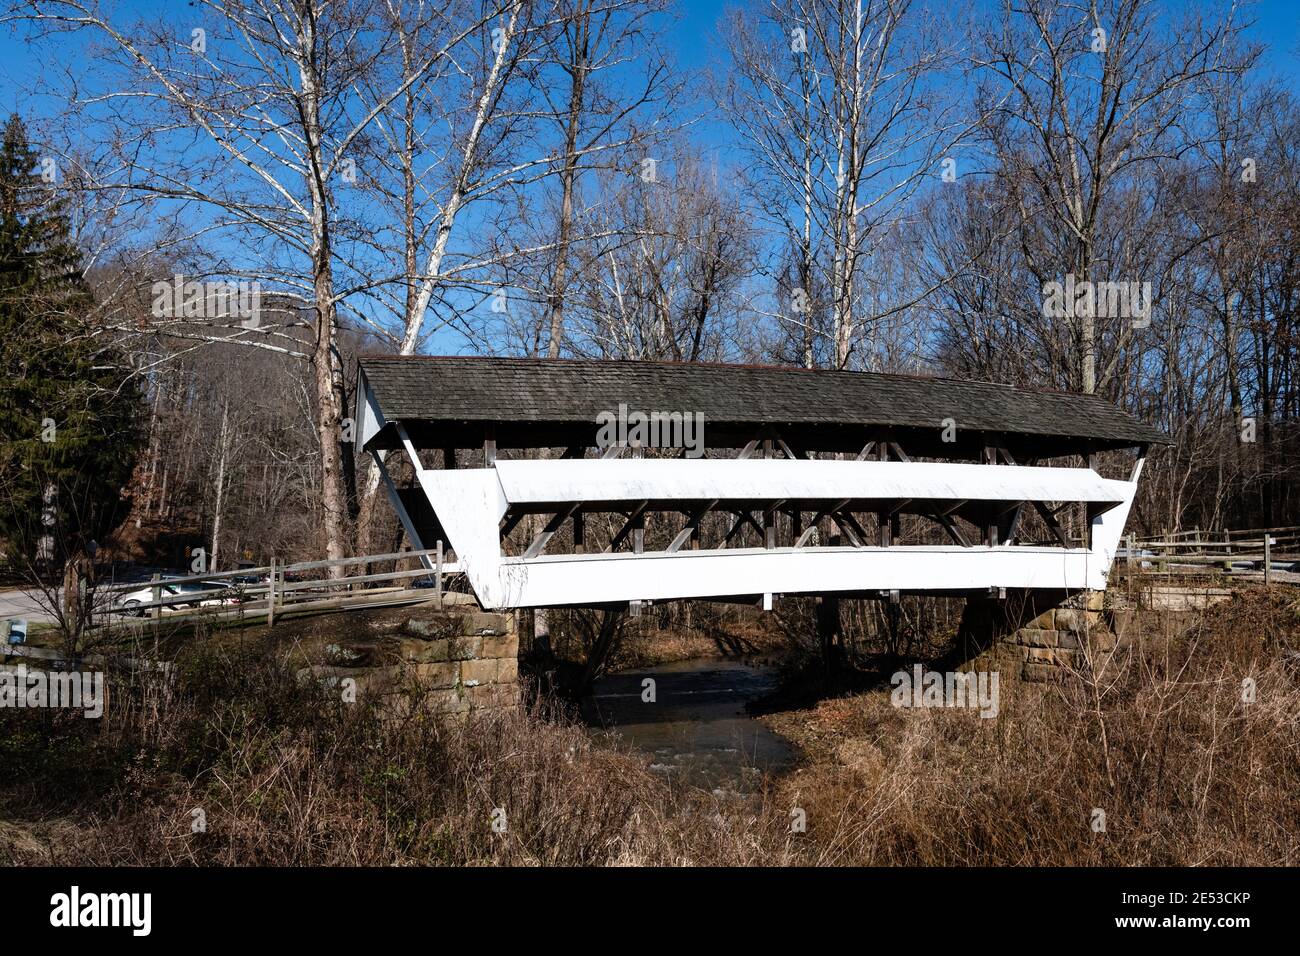 Lancaster, Ohio/USA-January 5. 2019: Historic Mink Hollow Covered Bridge located in Fairfield County, Ohio  spans Arney Run and was built in 1887. Stock Photo